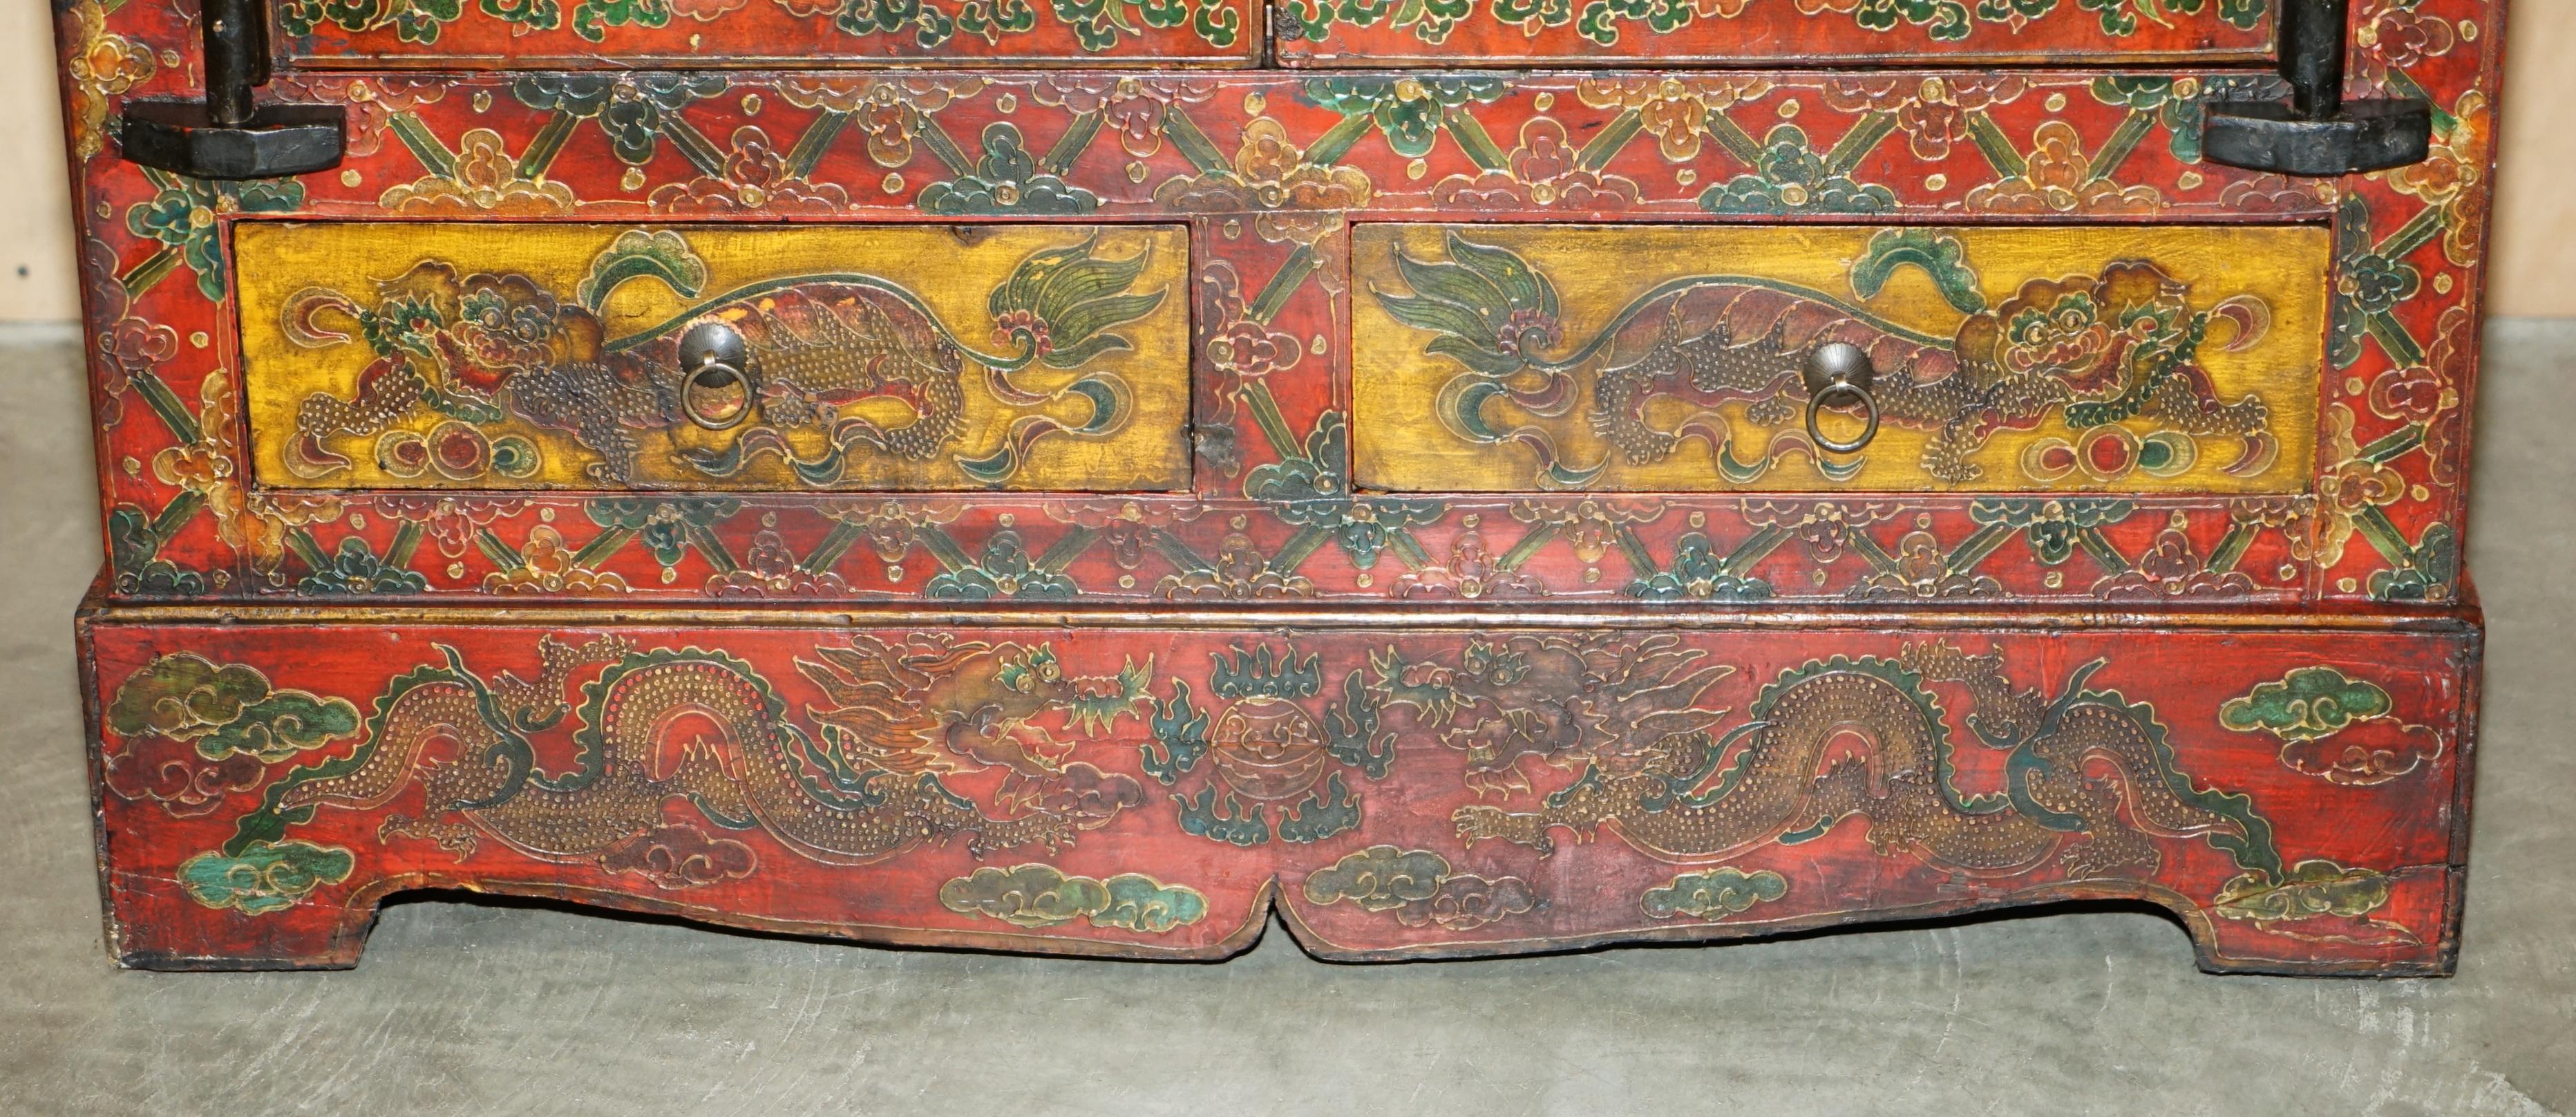 FULL SIZED ViNTAGE CHINESE RED DRAGONS PAINTED PAGODA TOP WARDROBE WITH DRAWERS For Sale 4